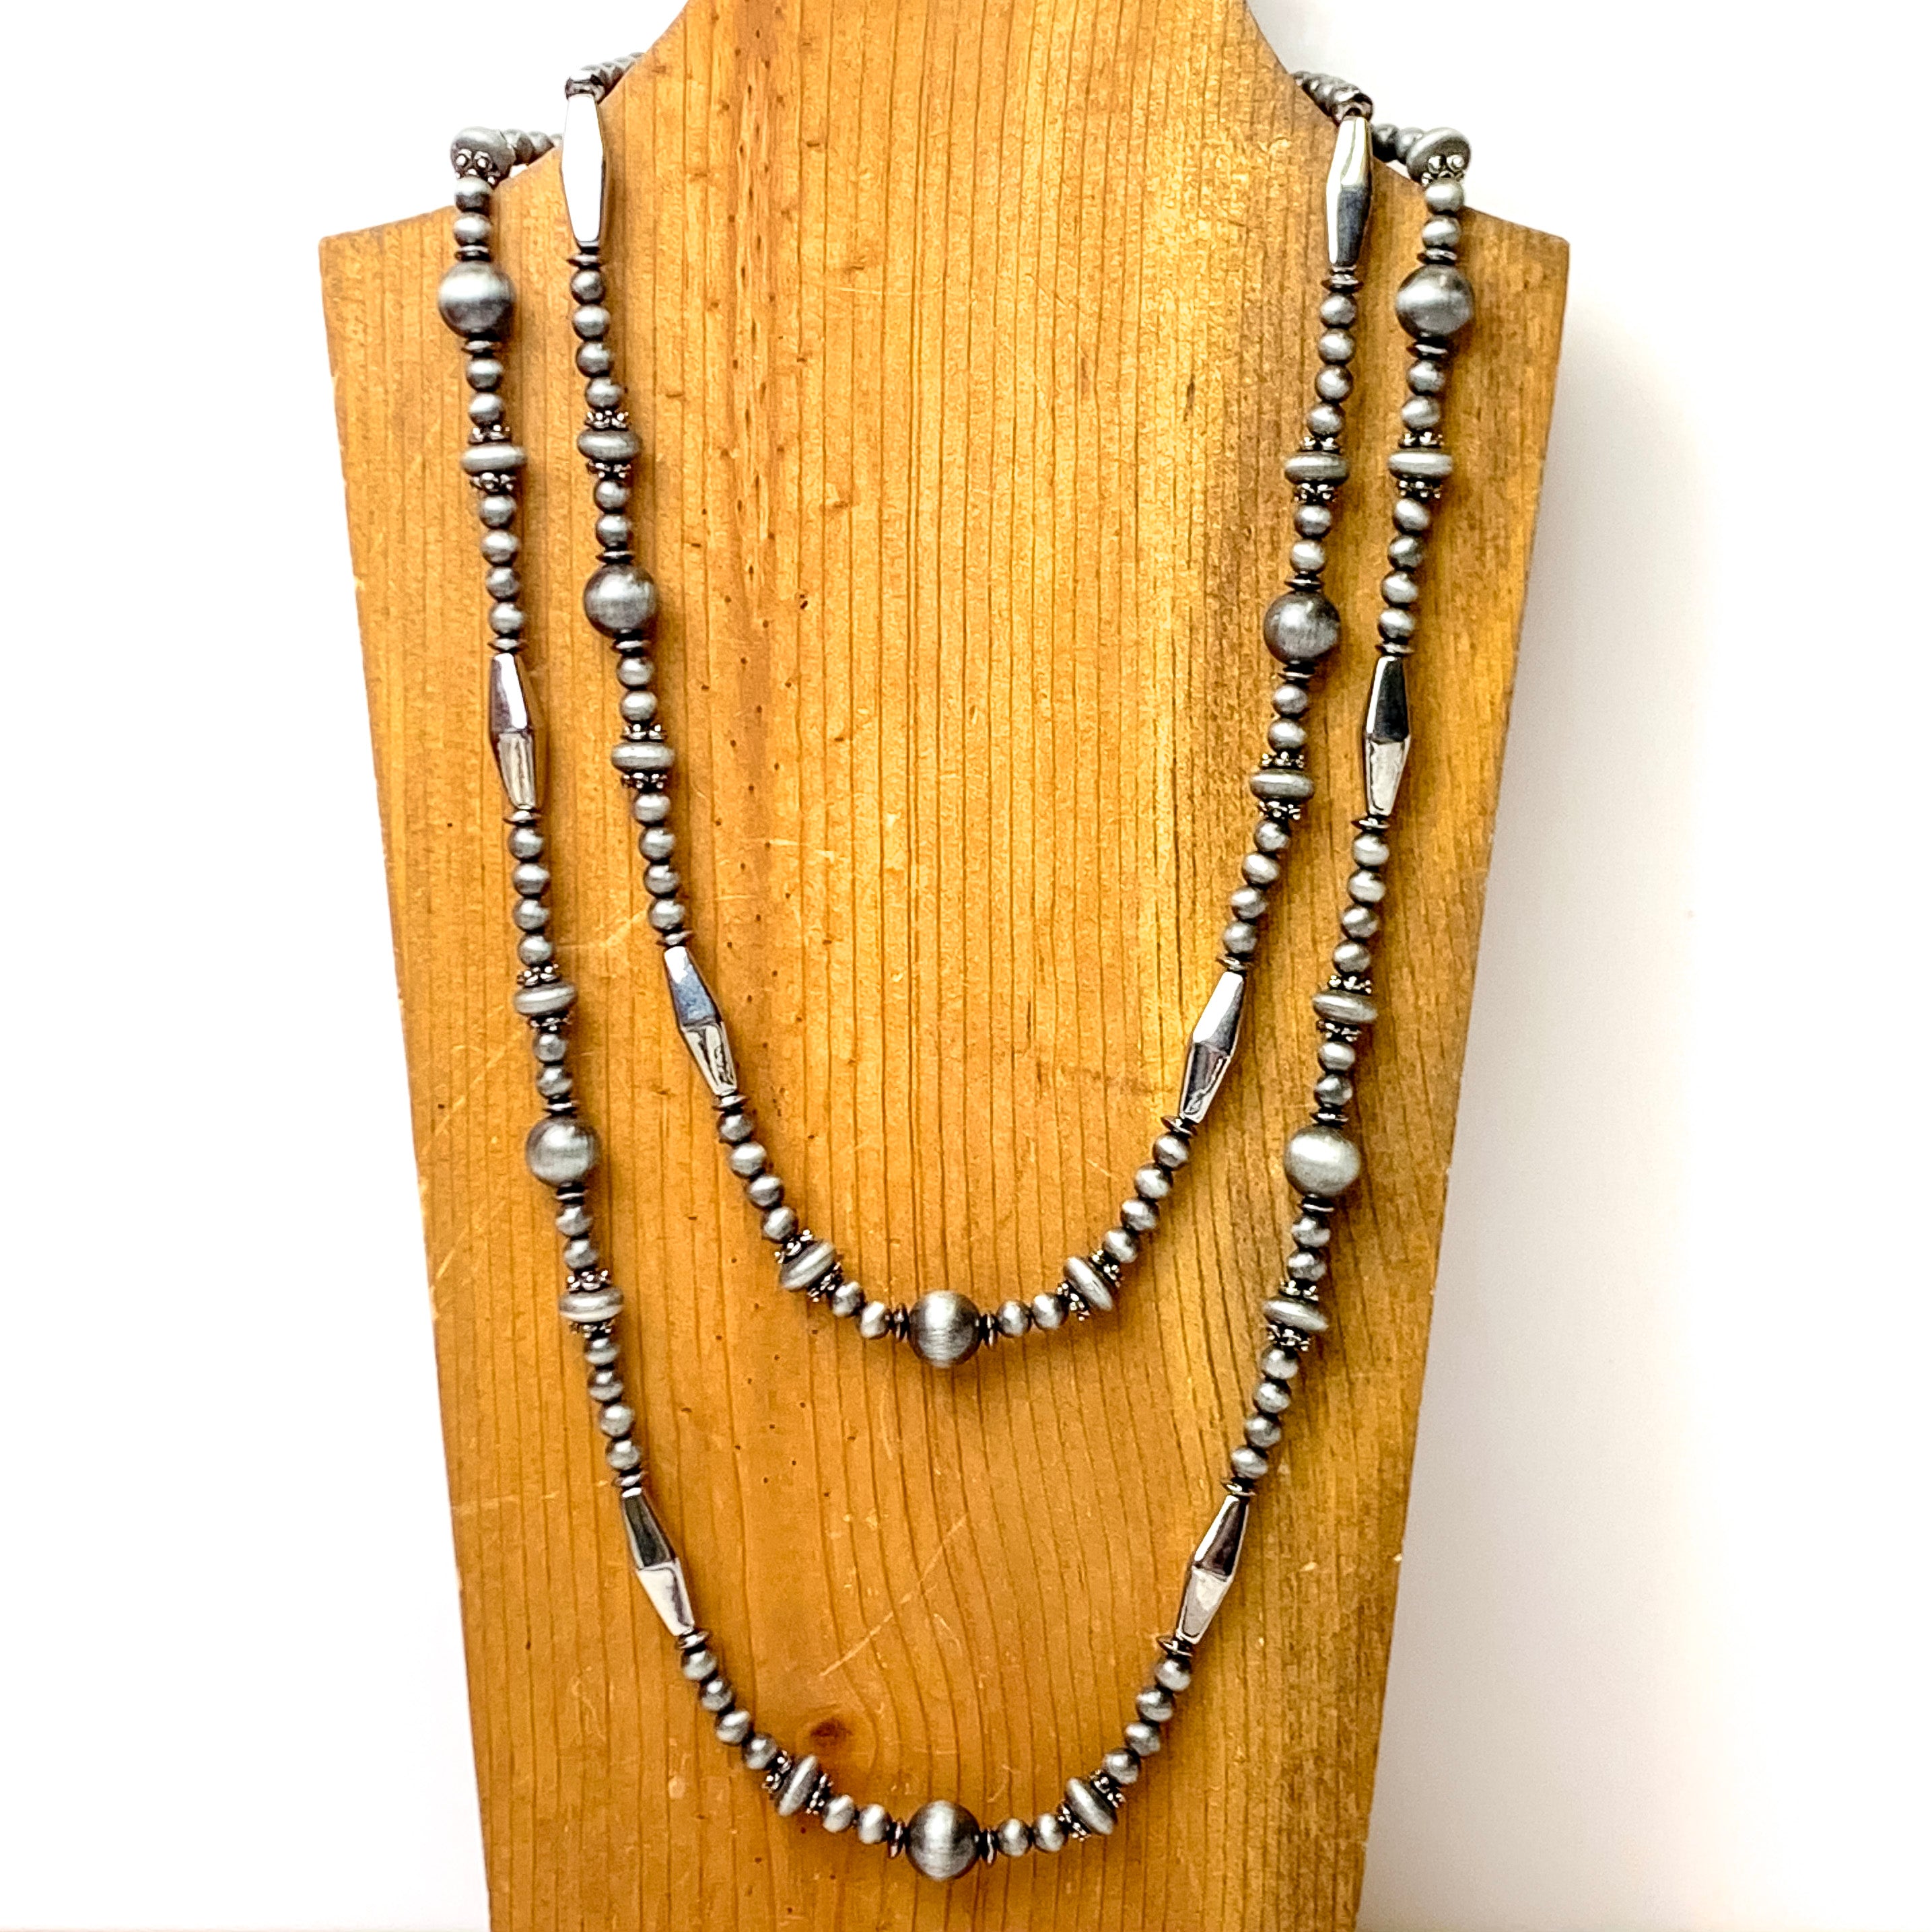 Silver Tone Faux Navajo Pearl and Melon Bead Layering Necklace - Giddy Up Glamour Boutique